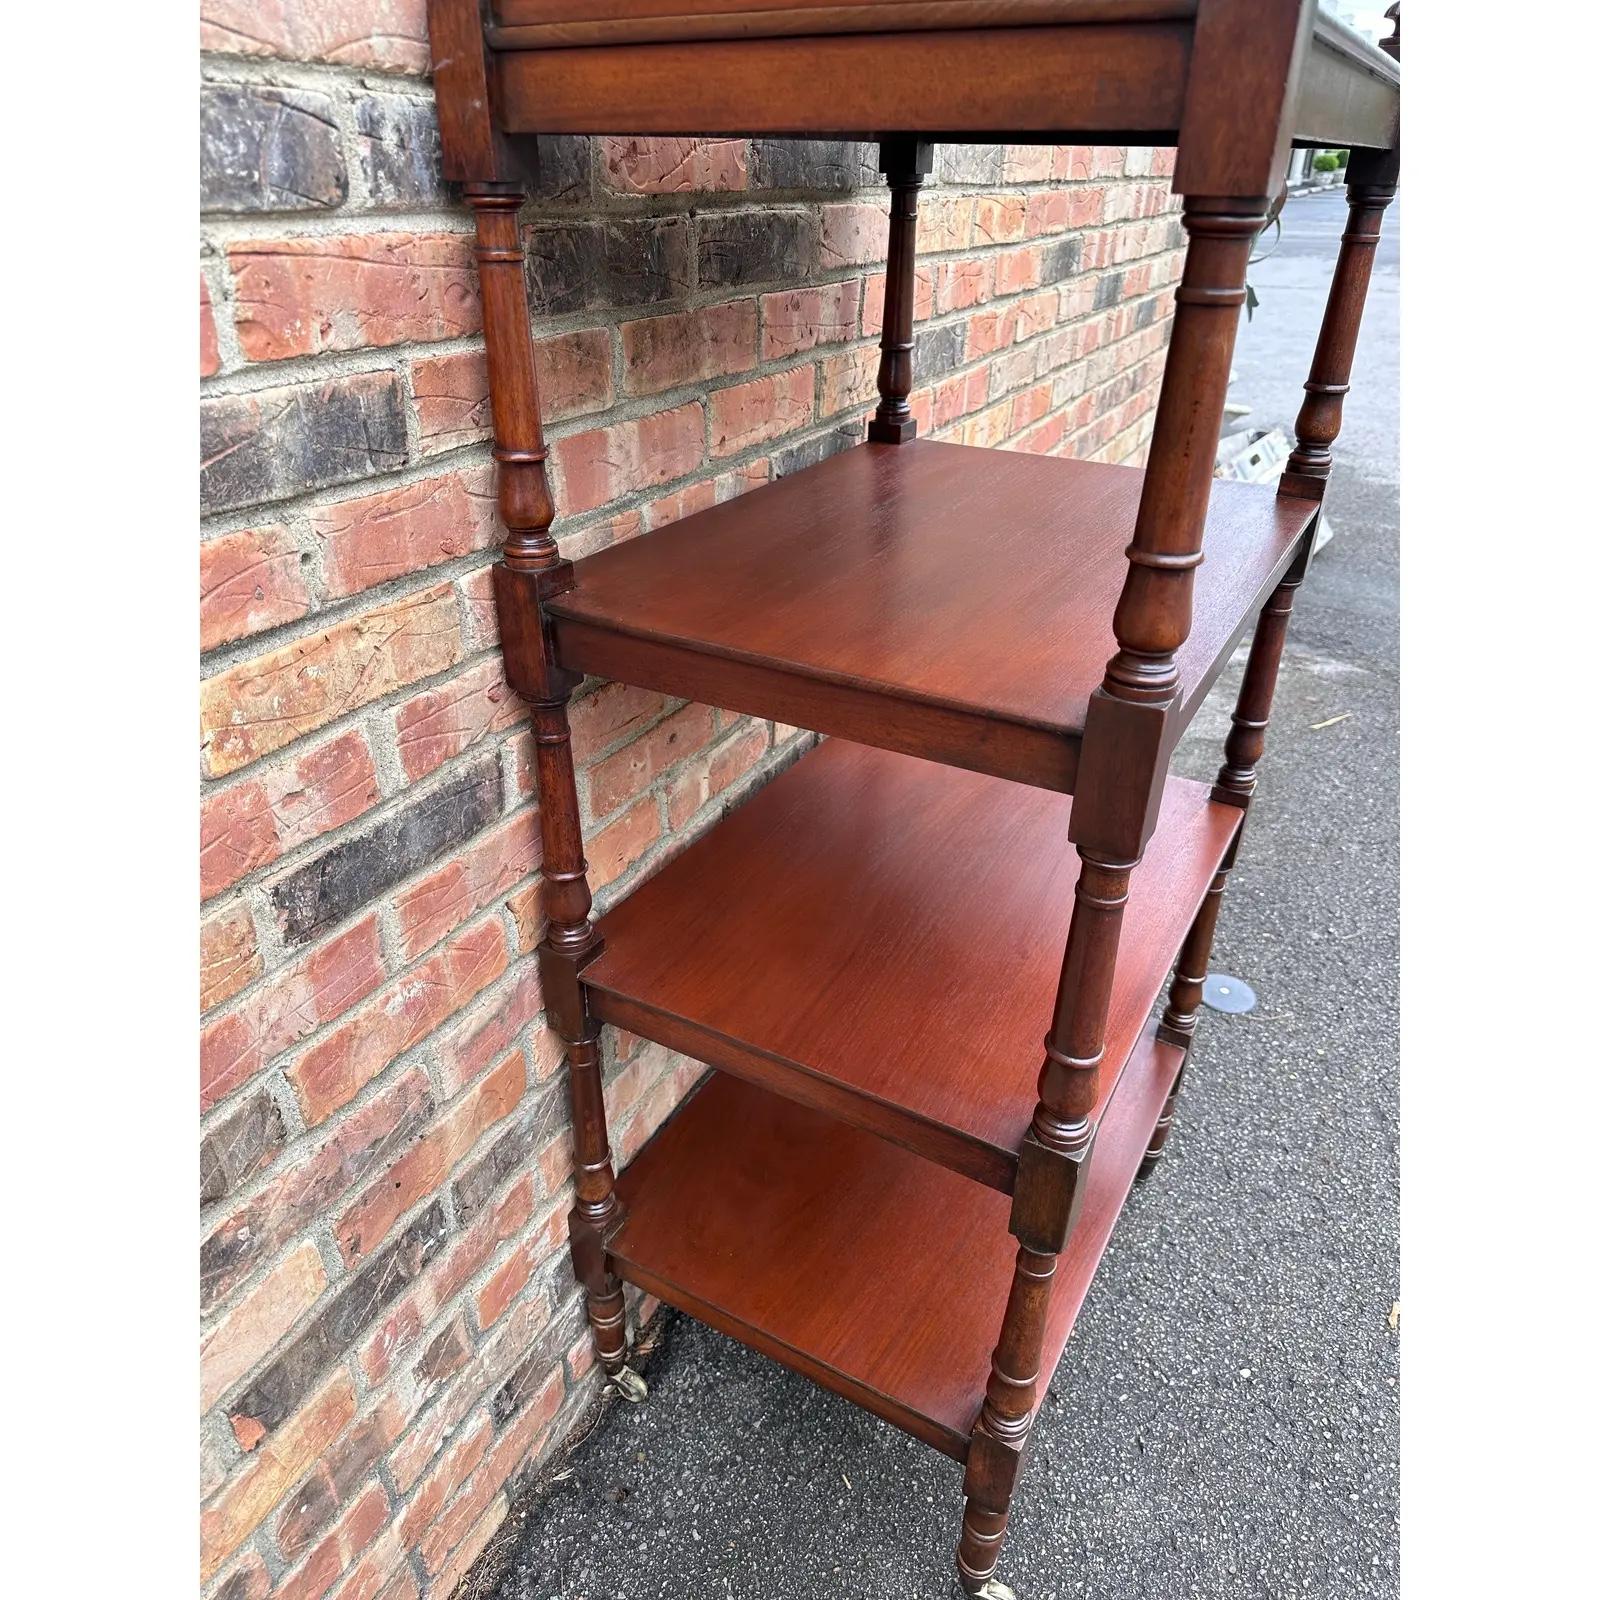 This is a beautiful mid 19th century English etagere with four shelves. Nicely turned legs resting on the original brass and white marble casters and beautiful patina and age. These are so useful and practical as well as being great aesthetic